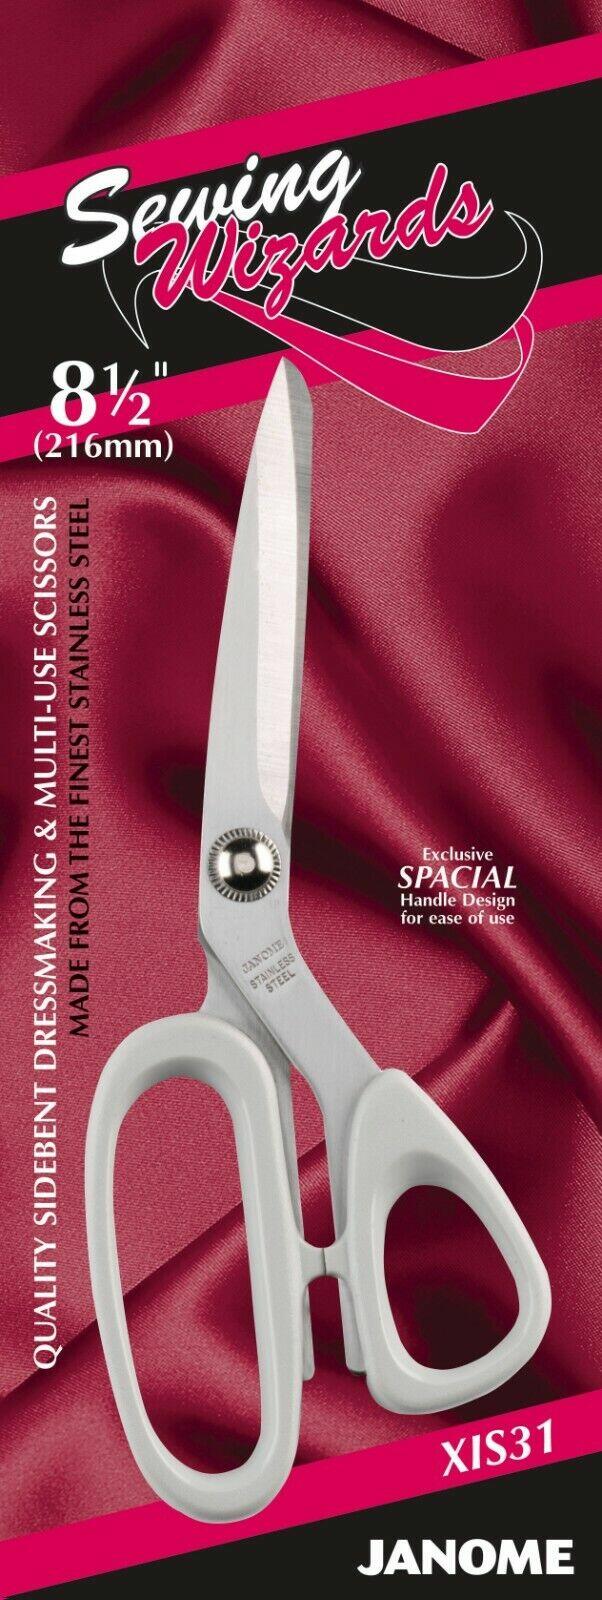 Kai N5210-L Left-Handed Fabric Scissors Stainless Steel 8 Inches / 210 mm :  : Home & Kitchen